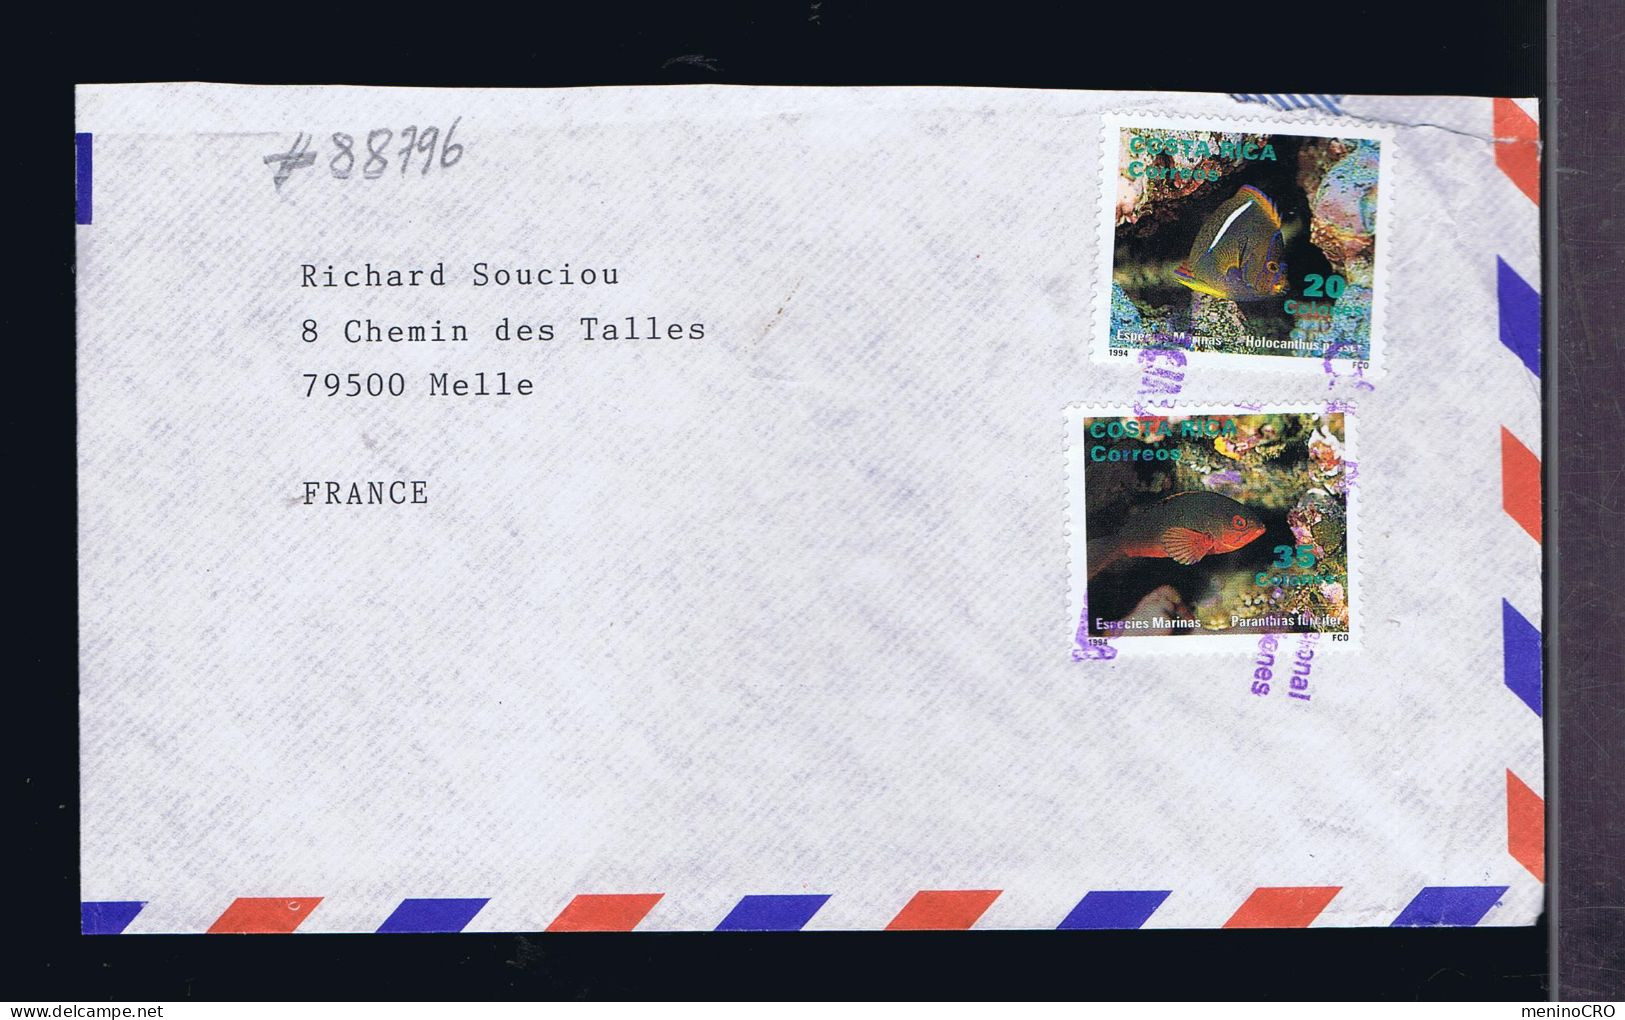 #88796 COSTA RICA Faune Fishes Poissons Espécimes Marines Mailed Melle -France - Poissons